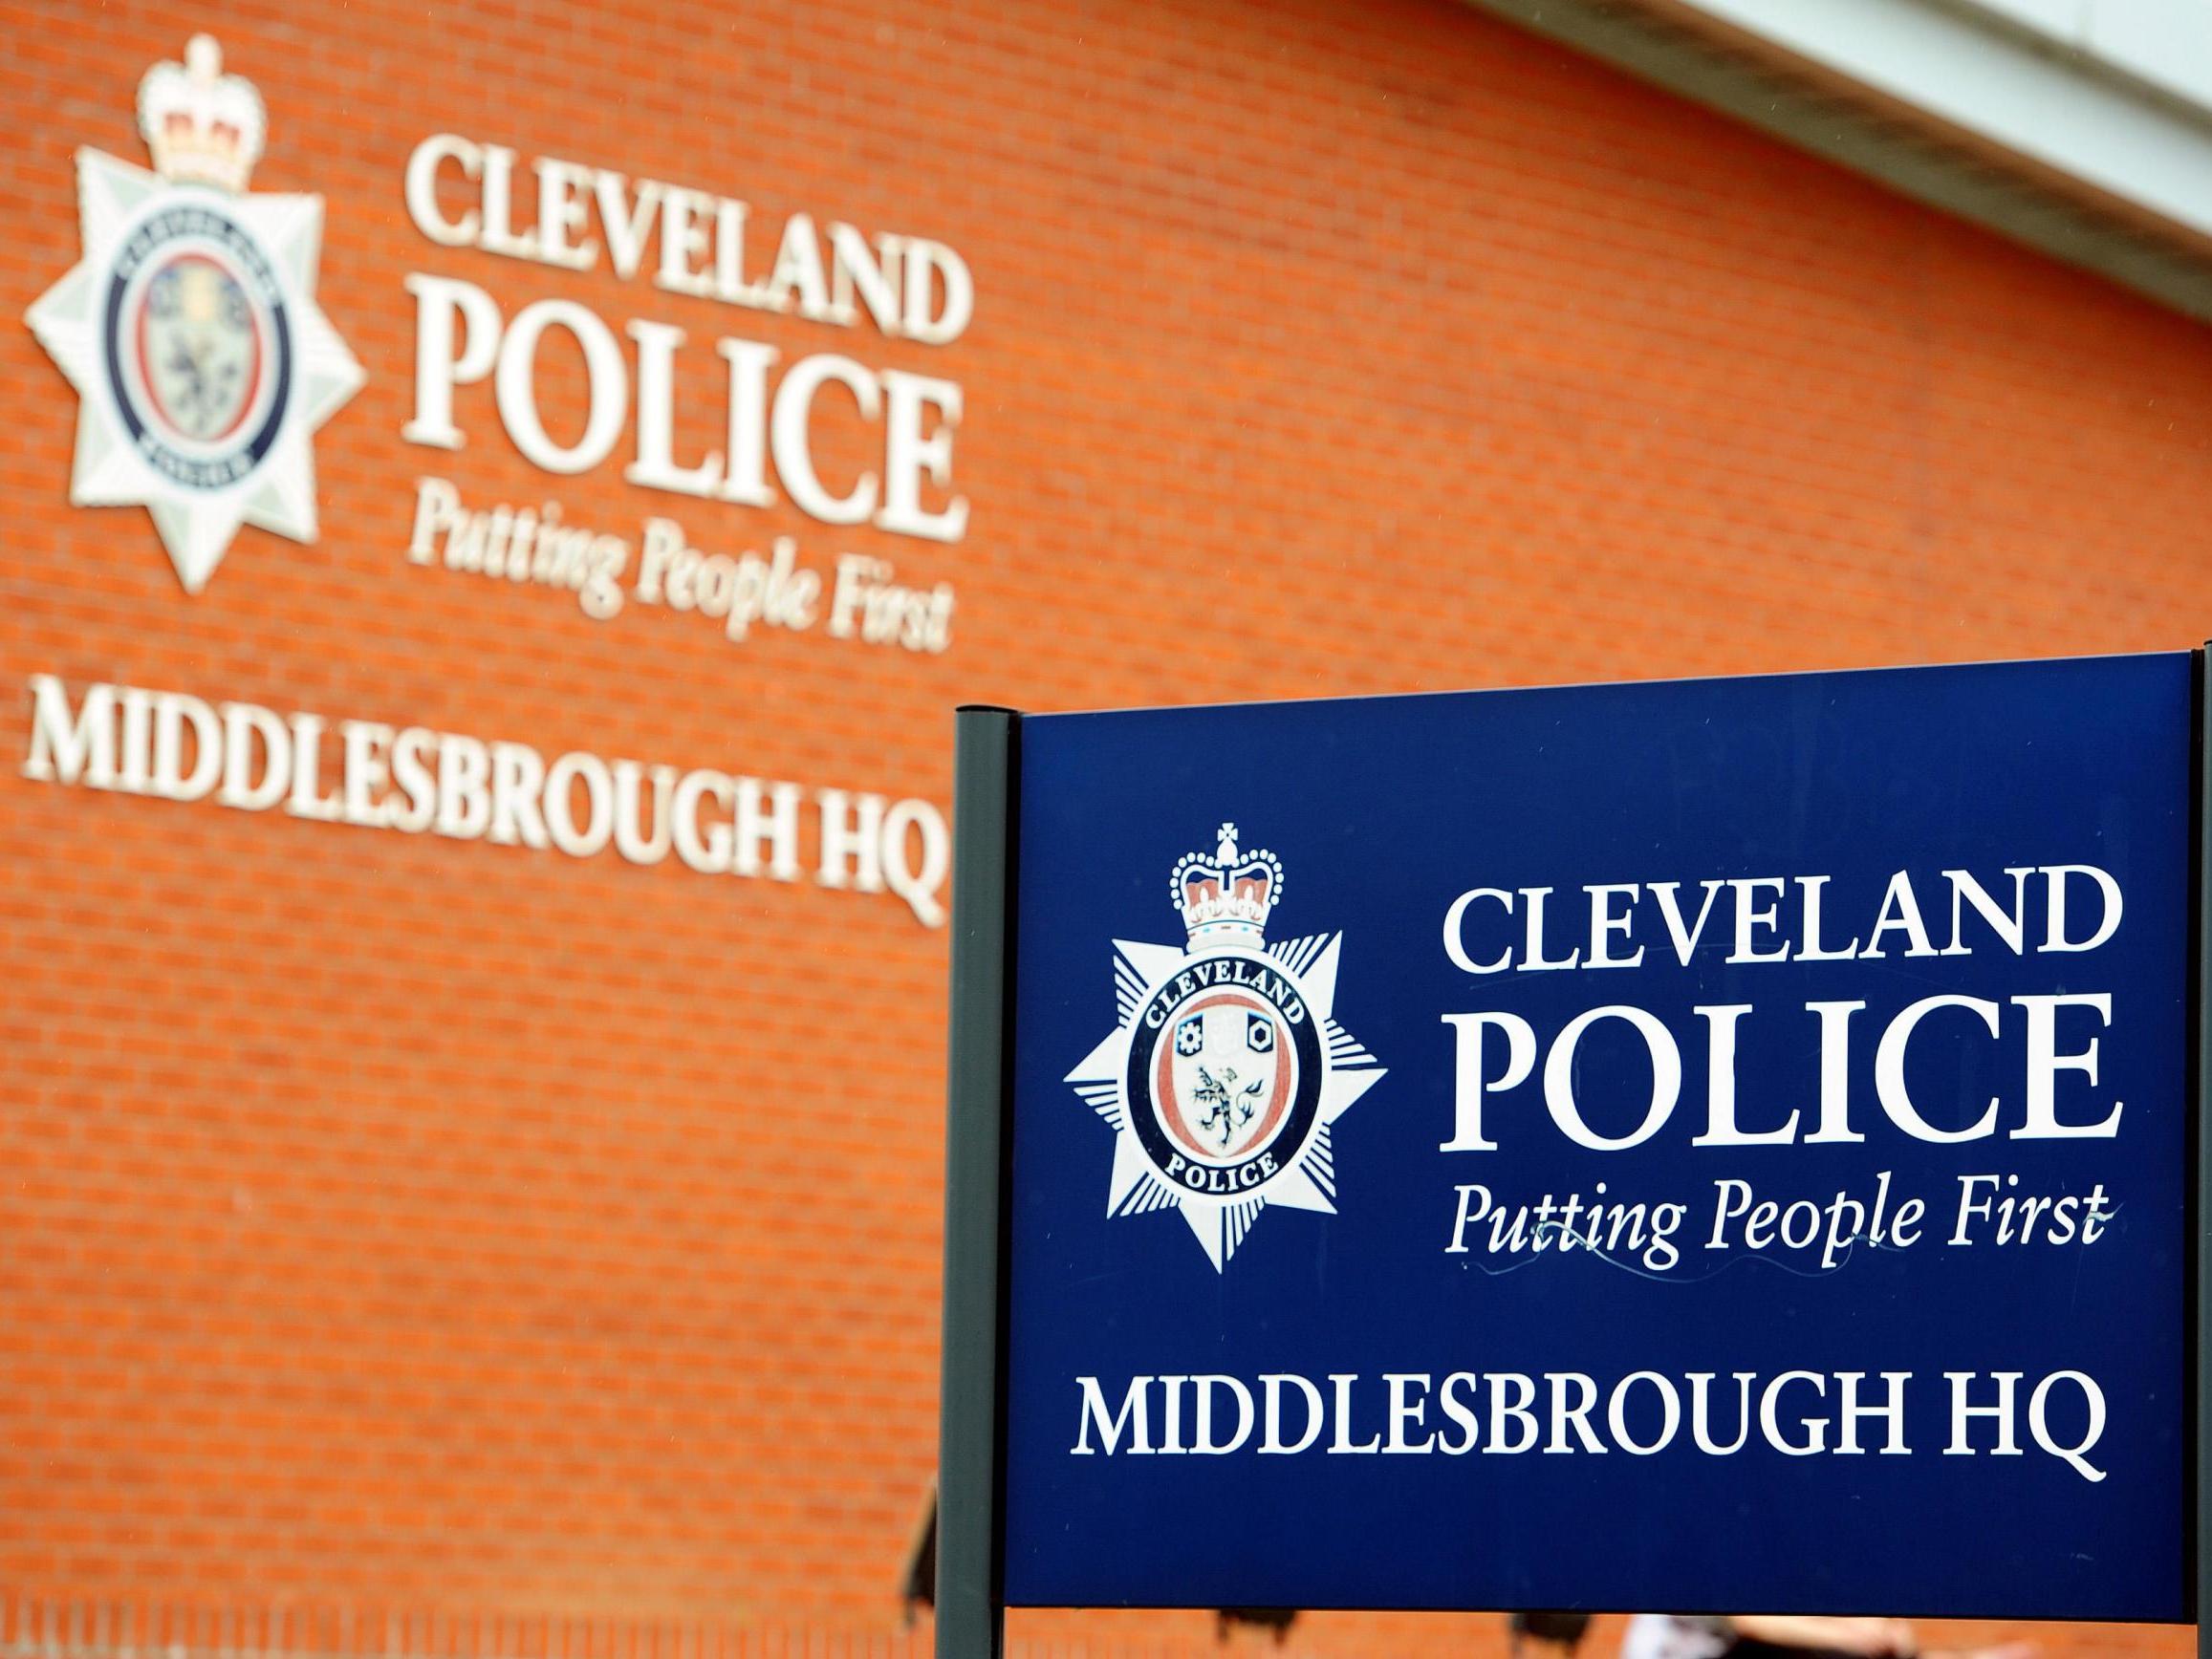 The Cleveland Police officer faces accusations of gross misconduct